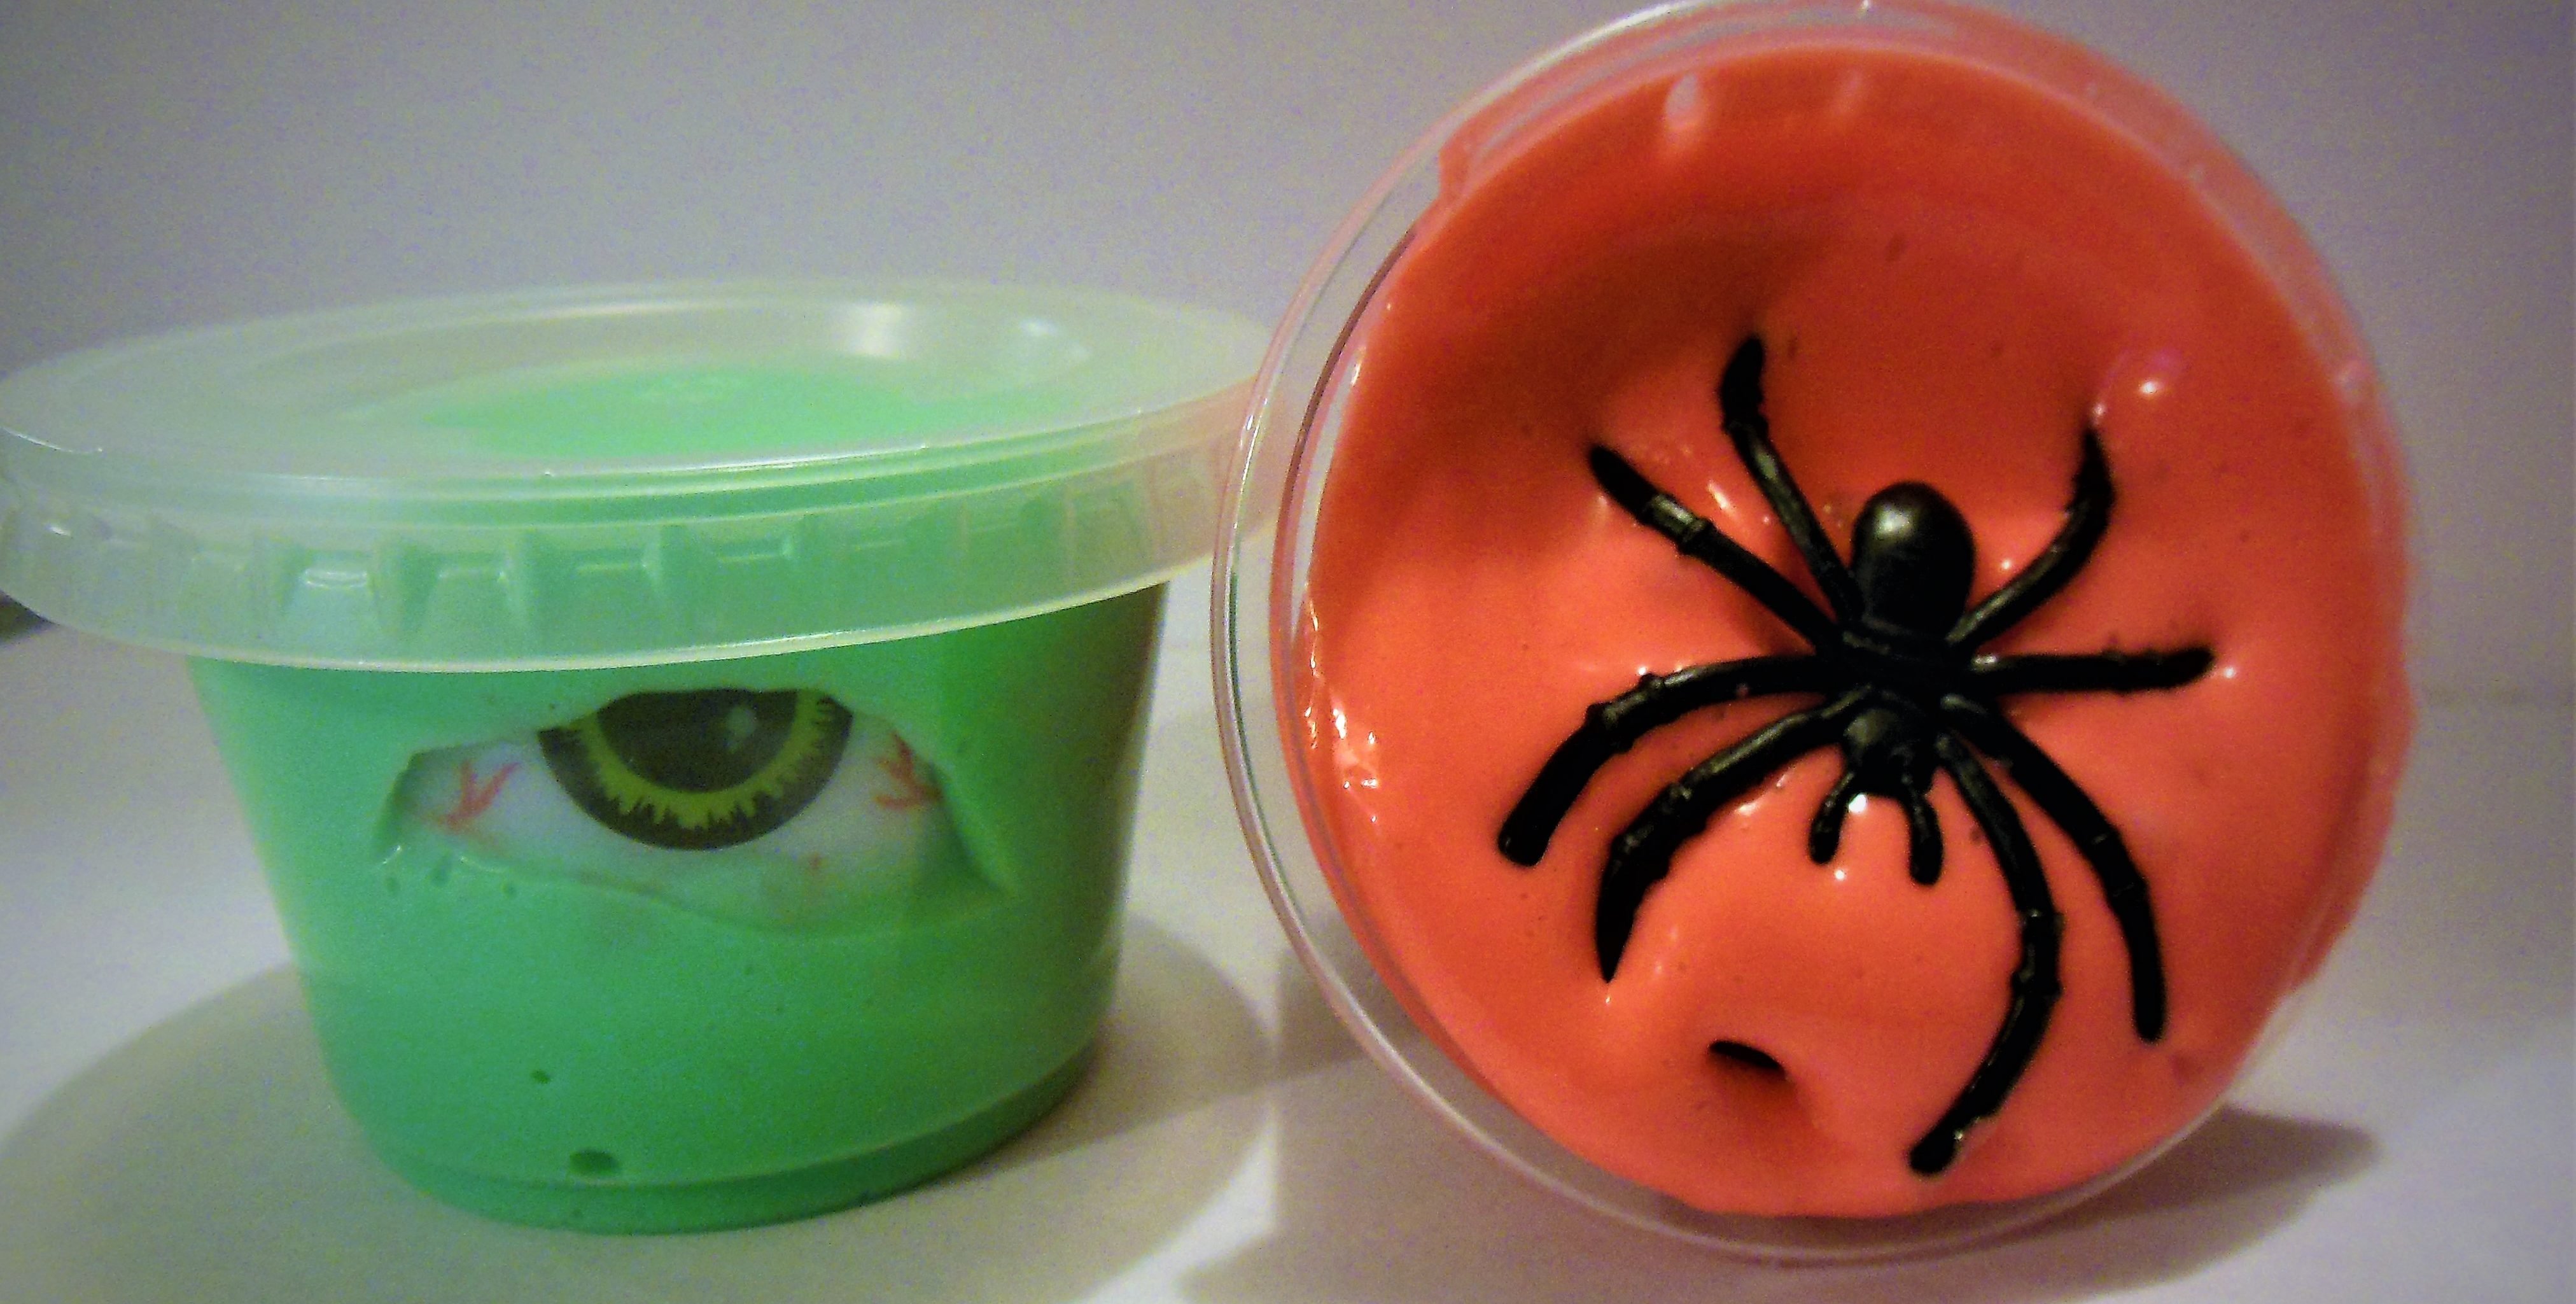 Monster Eyeball Slime & Spider Slime - This crazy slime is super fun and easy to make. It can be made by adding plastic eyeballs, spiders, or any other silly, small toys to your favorite slime recipe! It would make a great party favor. Watch our video tutorial below to find out how to make this slime and learn other slime-making tips from the experts.